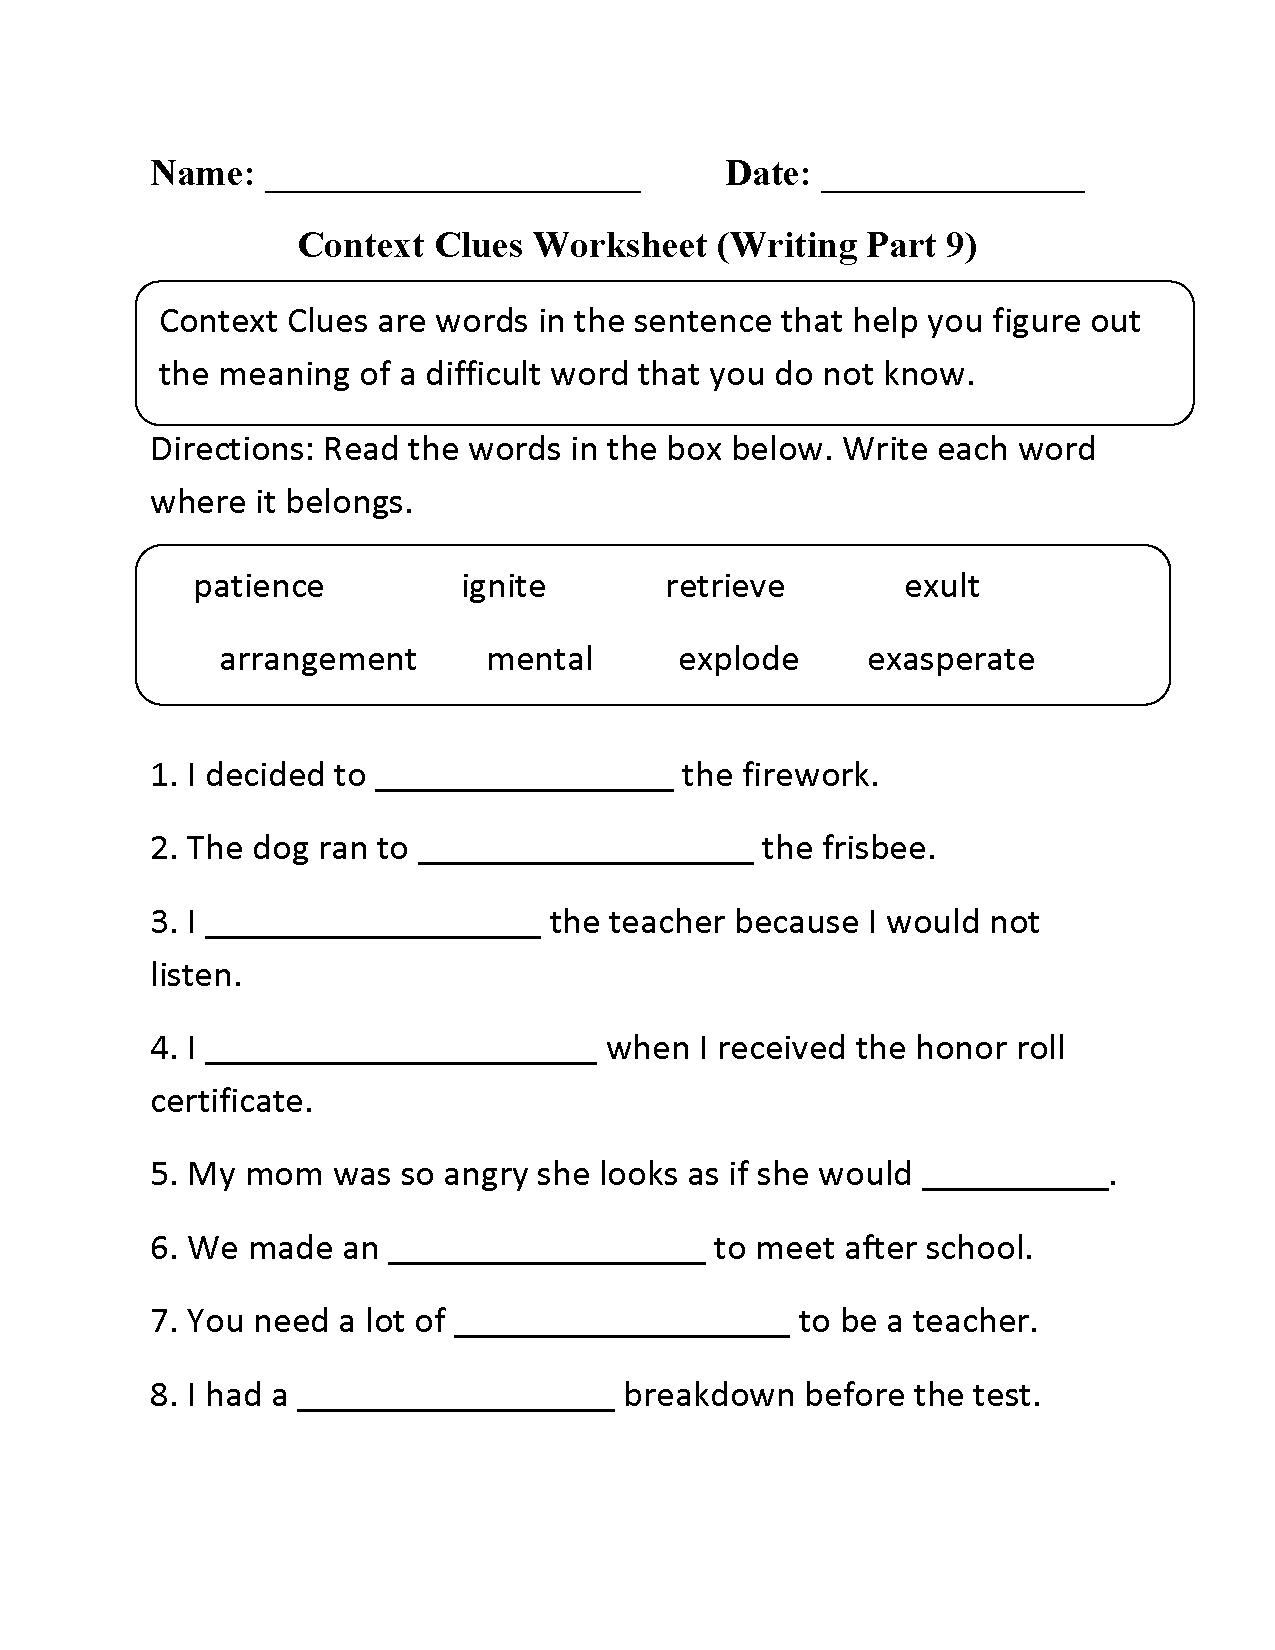 Context Clues Worksheet Writing Part 9 Intermediate | Context Clues - Free Printable 5Th Grade Context Clues Worksheets